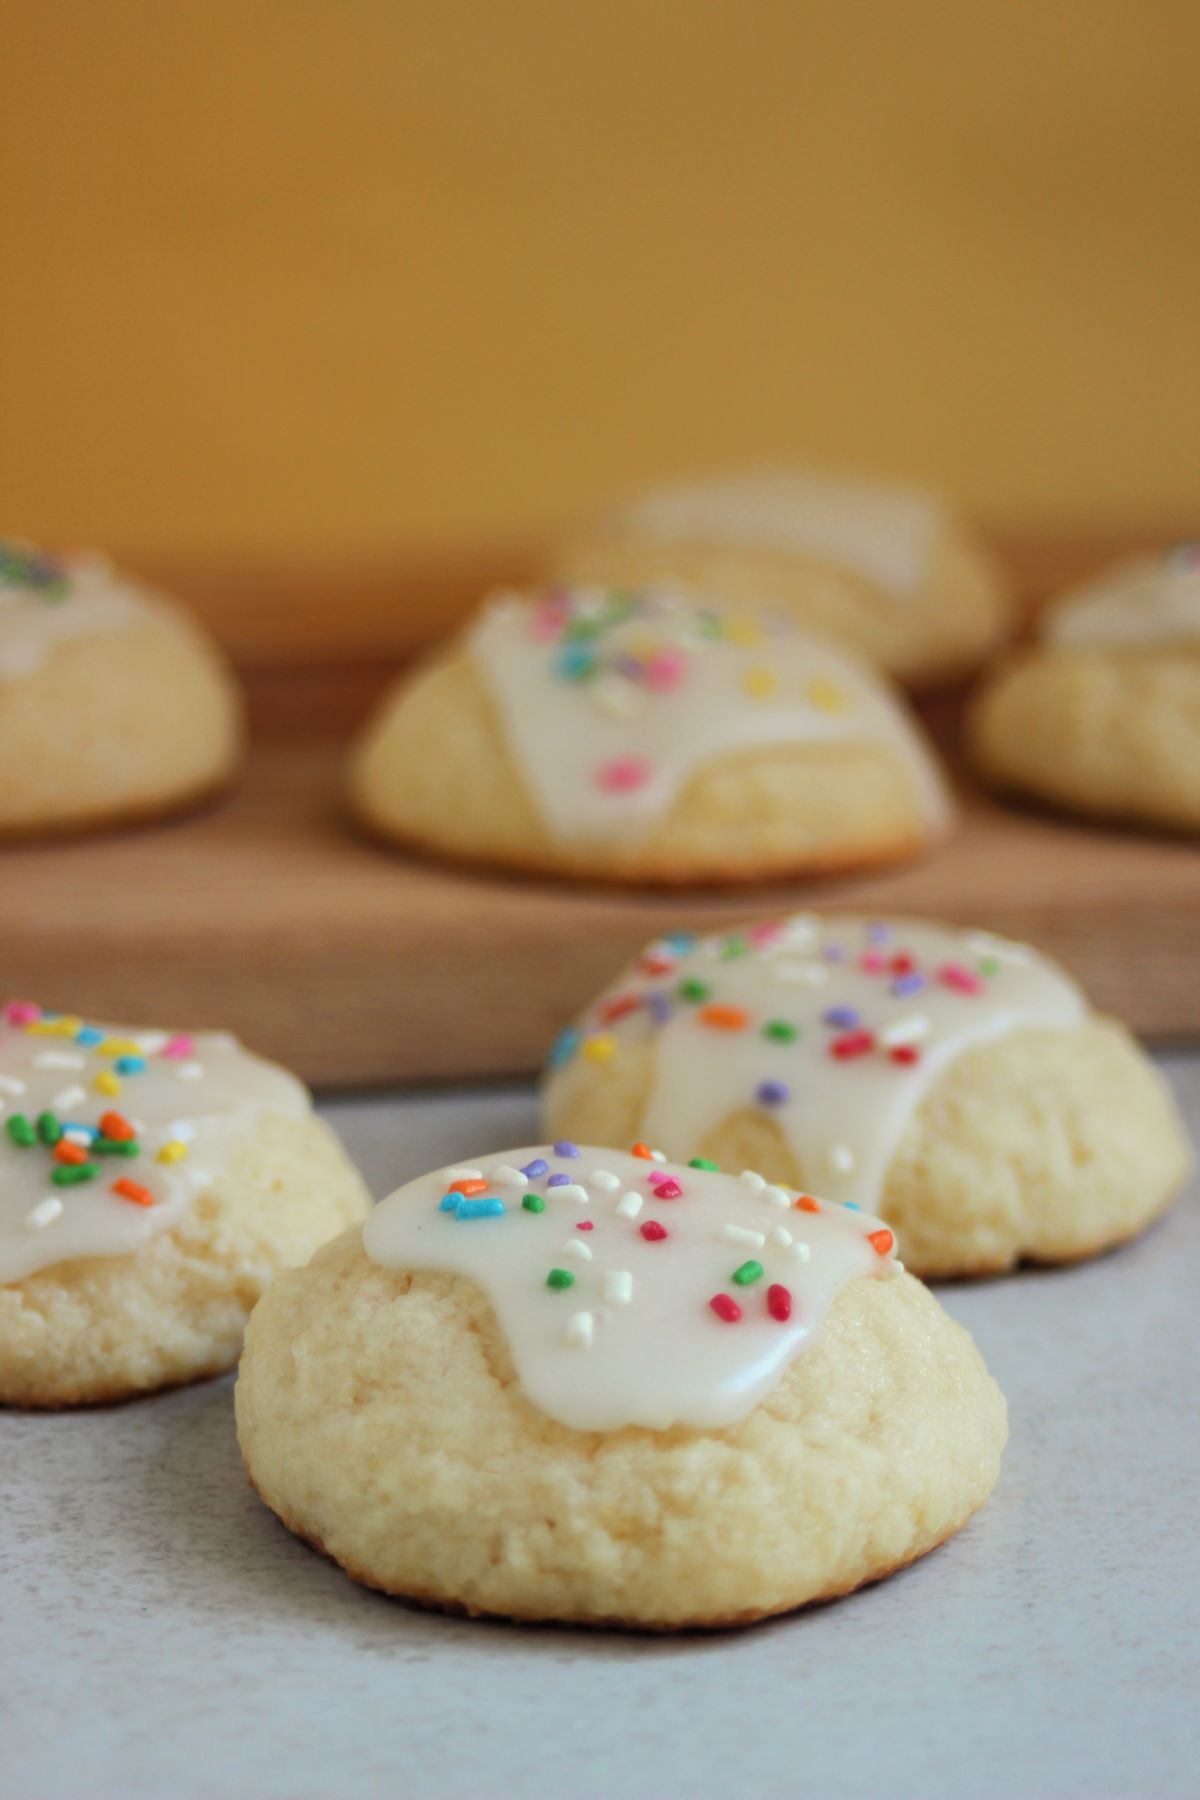 Ricotta cookies with icing and sprinkles. More cookies behind on a wooden board.